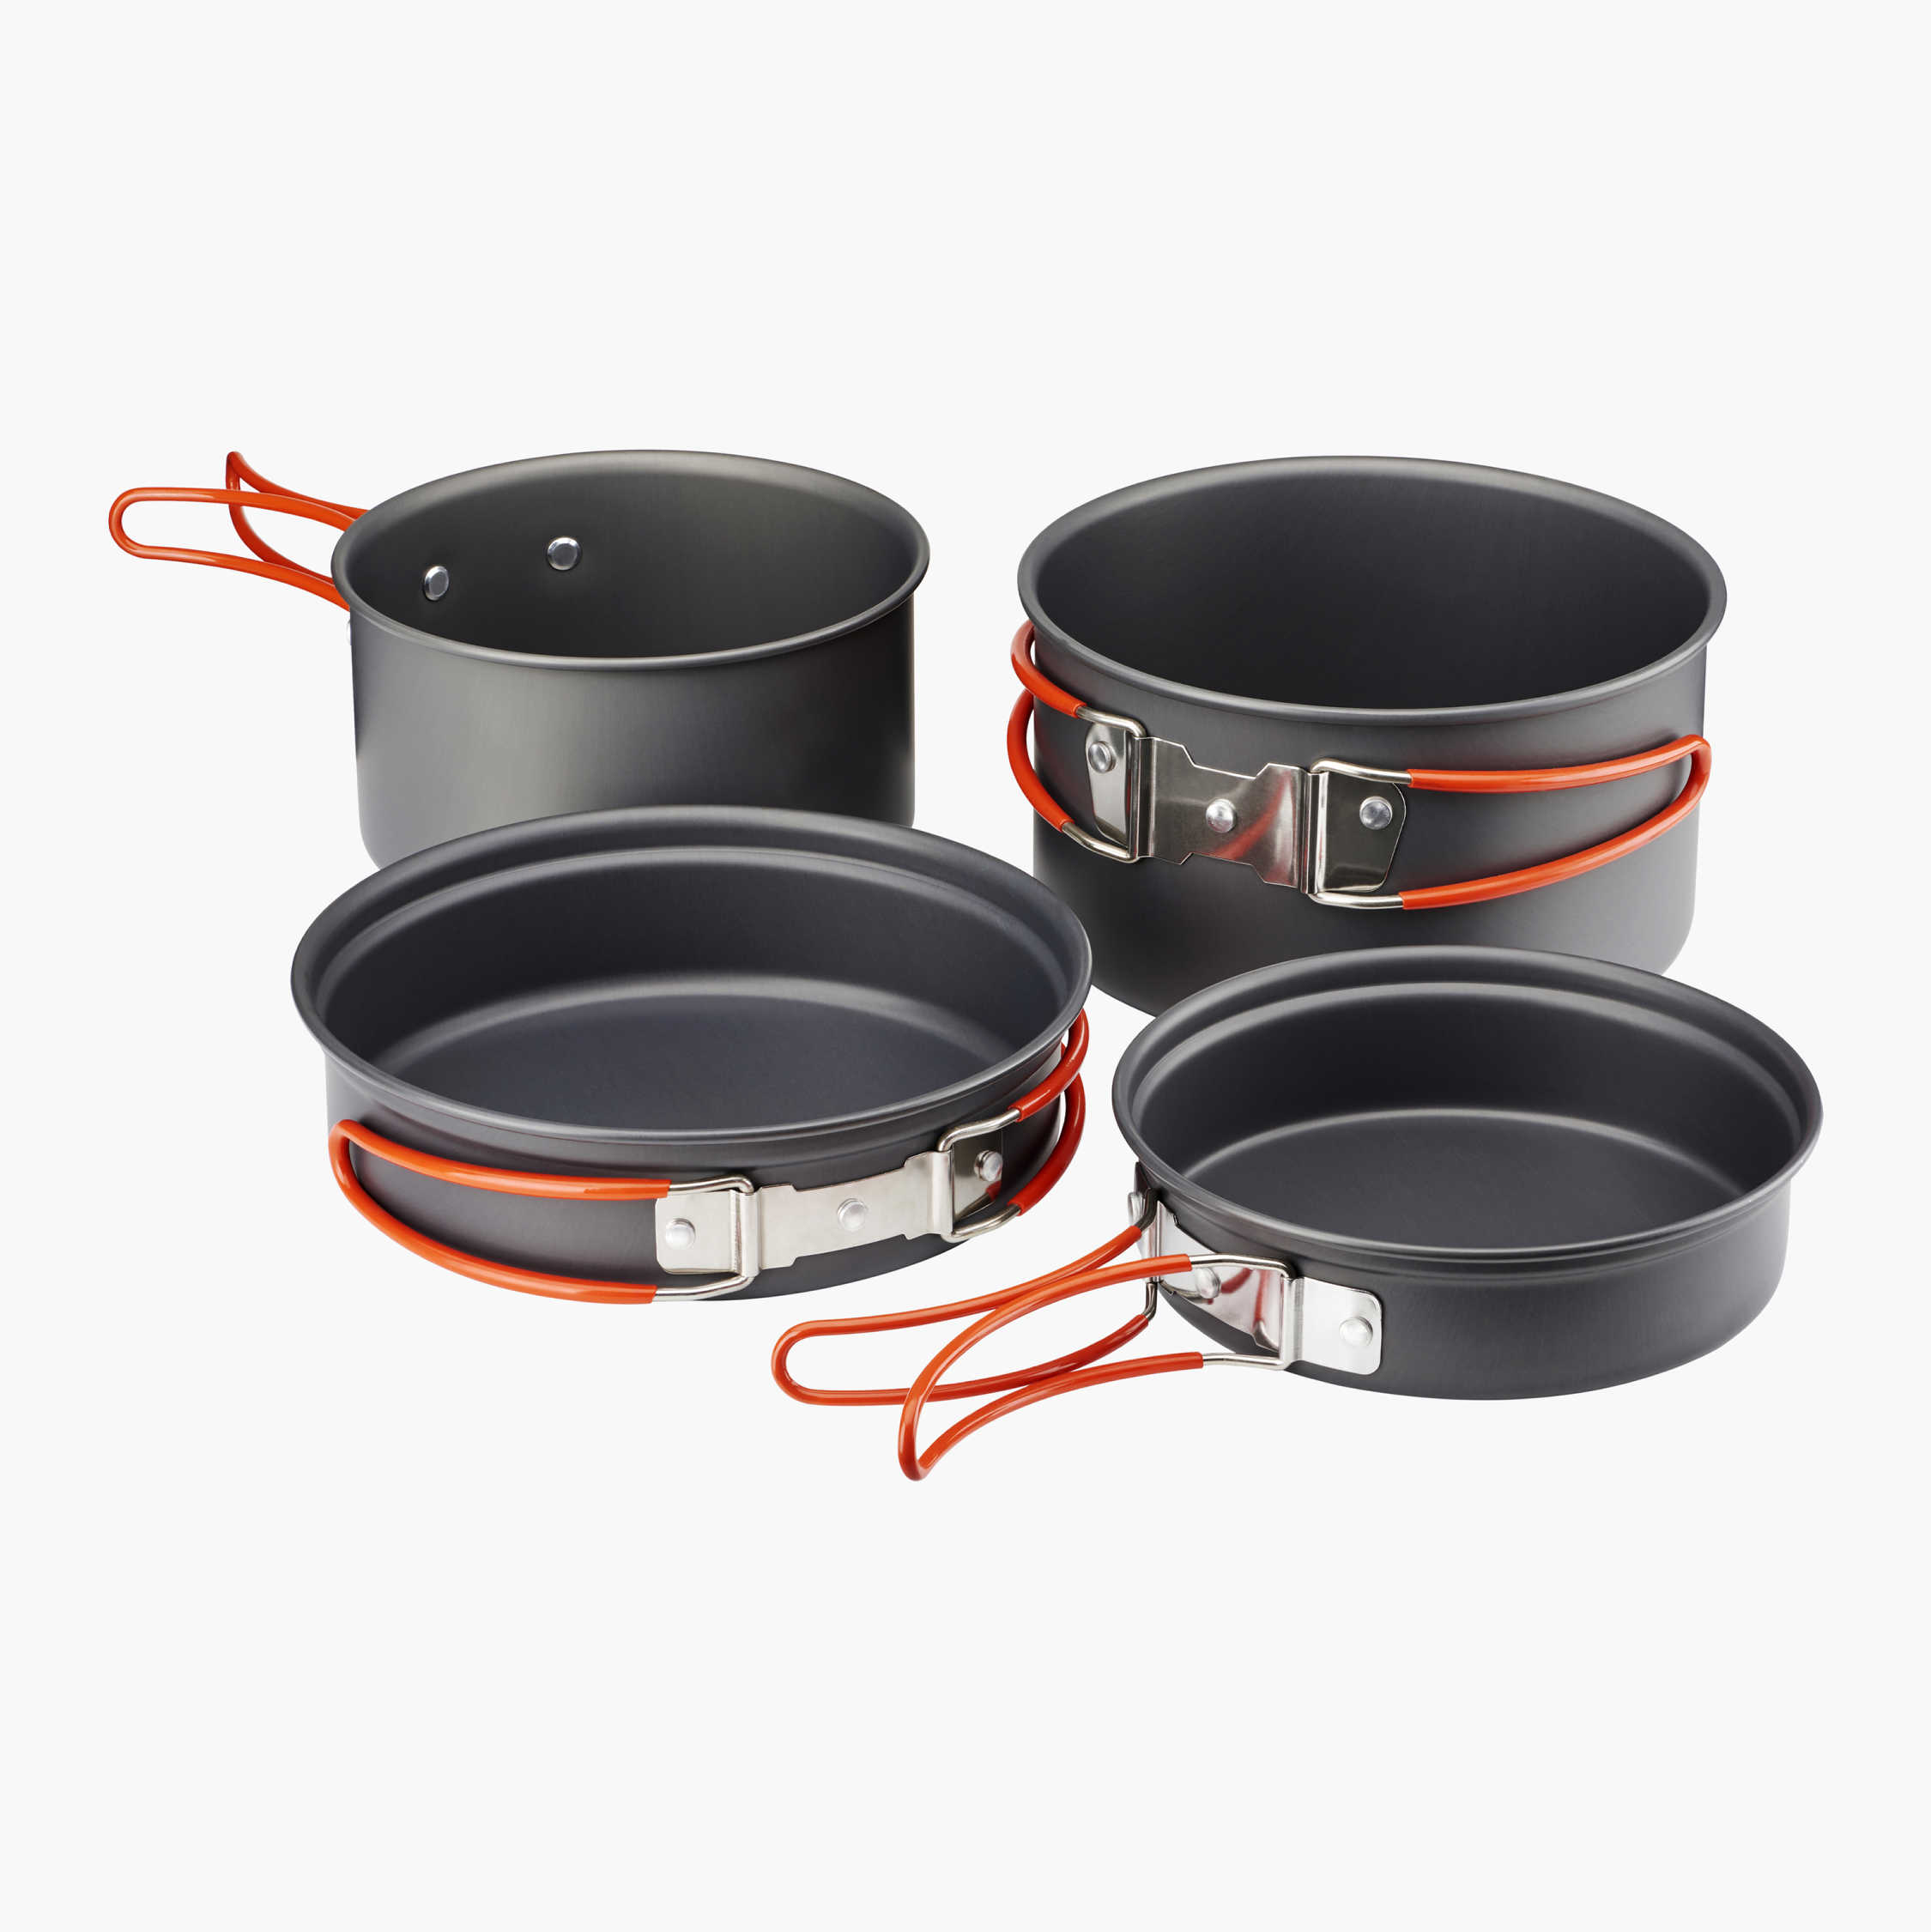 Accessories DUzhen DS-101 Portable Outdoor Camping Cooking Set Picnic Boiler Cookware Combination Black